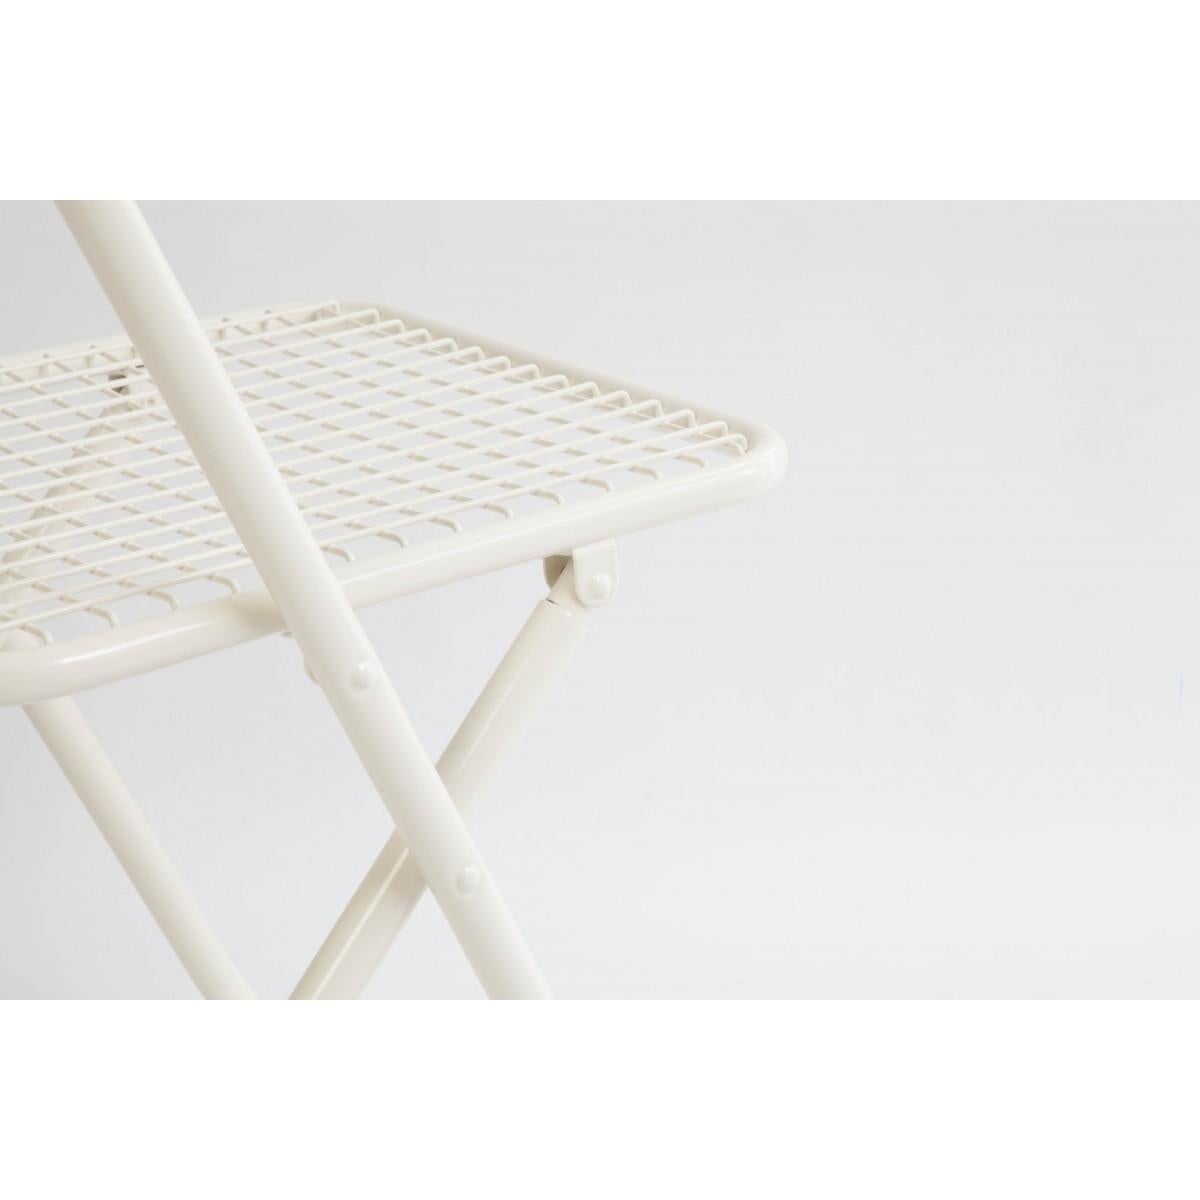 Contemporary New Folding Iron Chair Beige 1013 by Houtique signed by Federico Giner, Spain